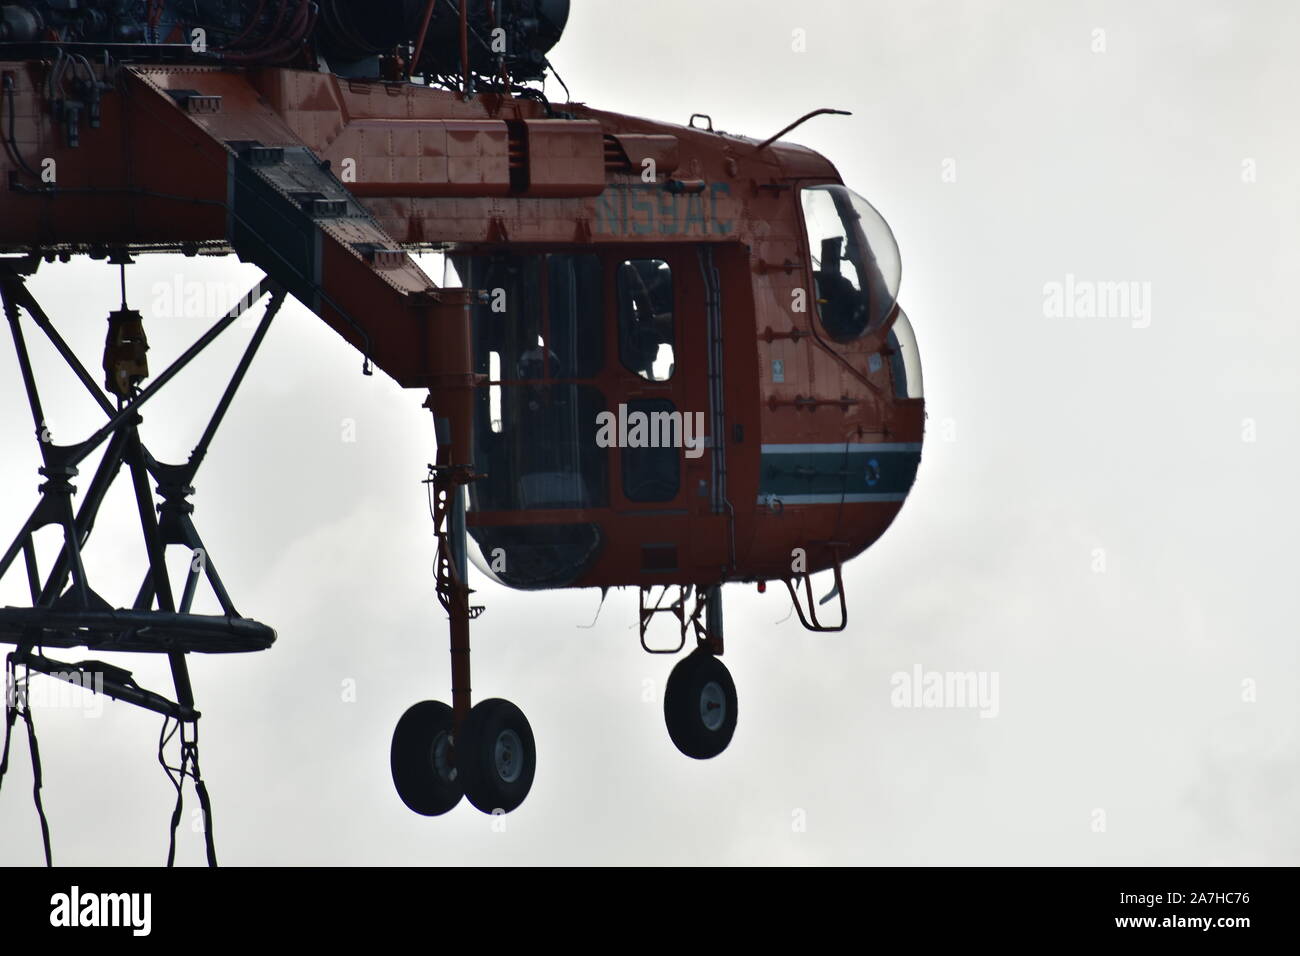 Sikorsky S-64 Skycrane Helicopter at work in Miami, Florida Stock Photo